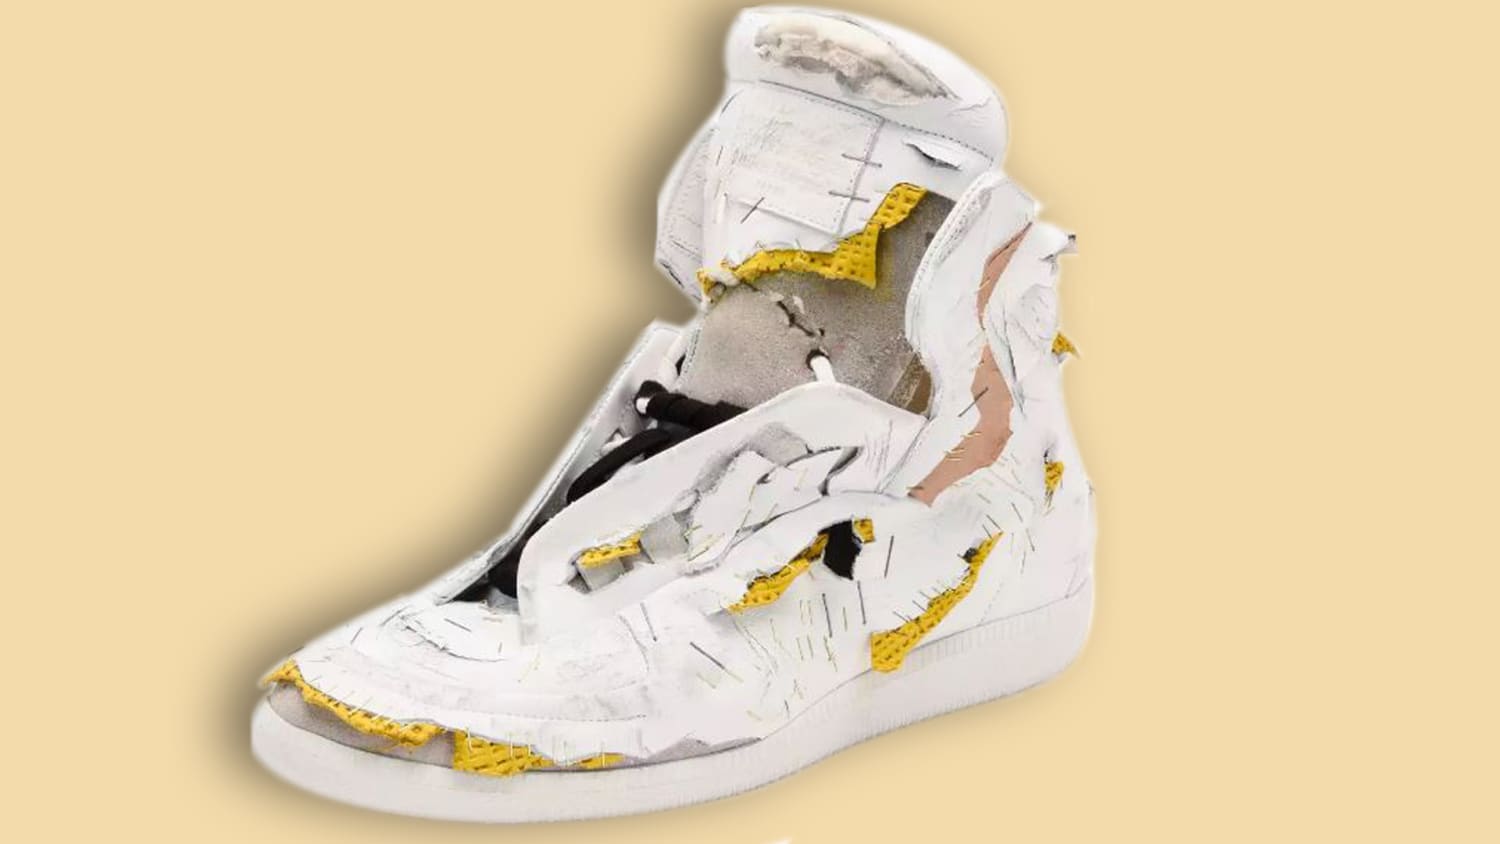 Neiman Marcus is selling $1,425 'destroyed' sneakers